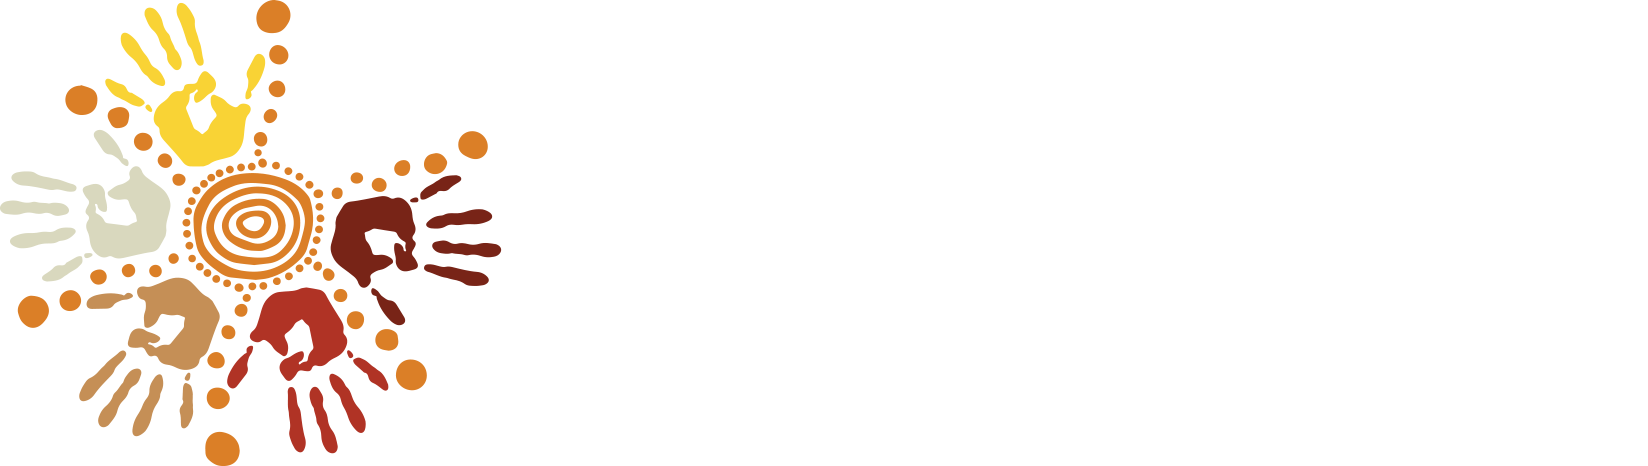 First Nations Enterprise